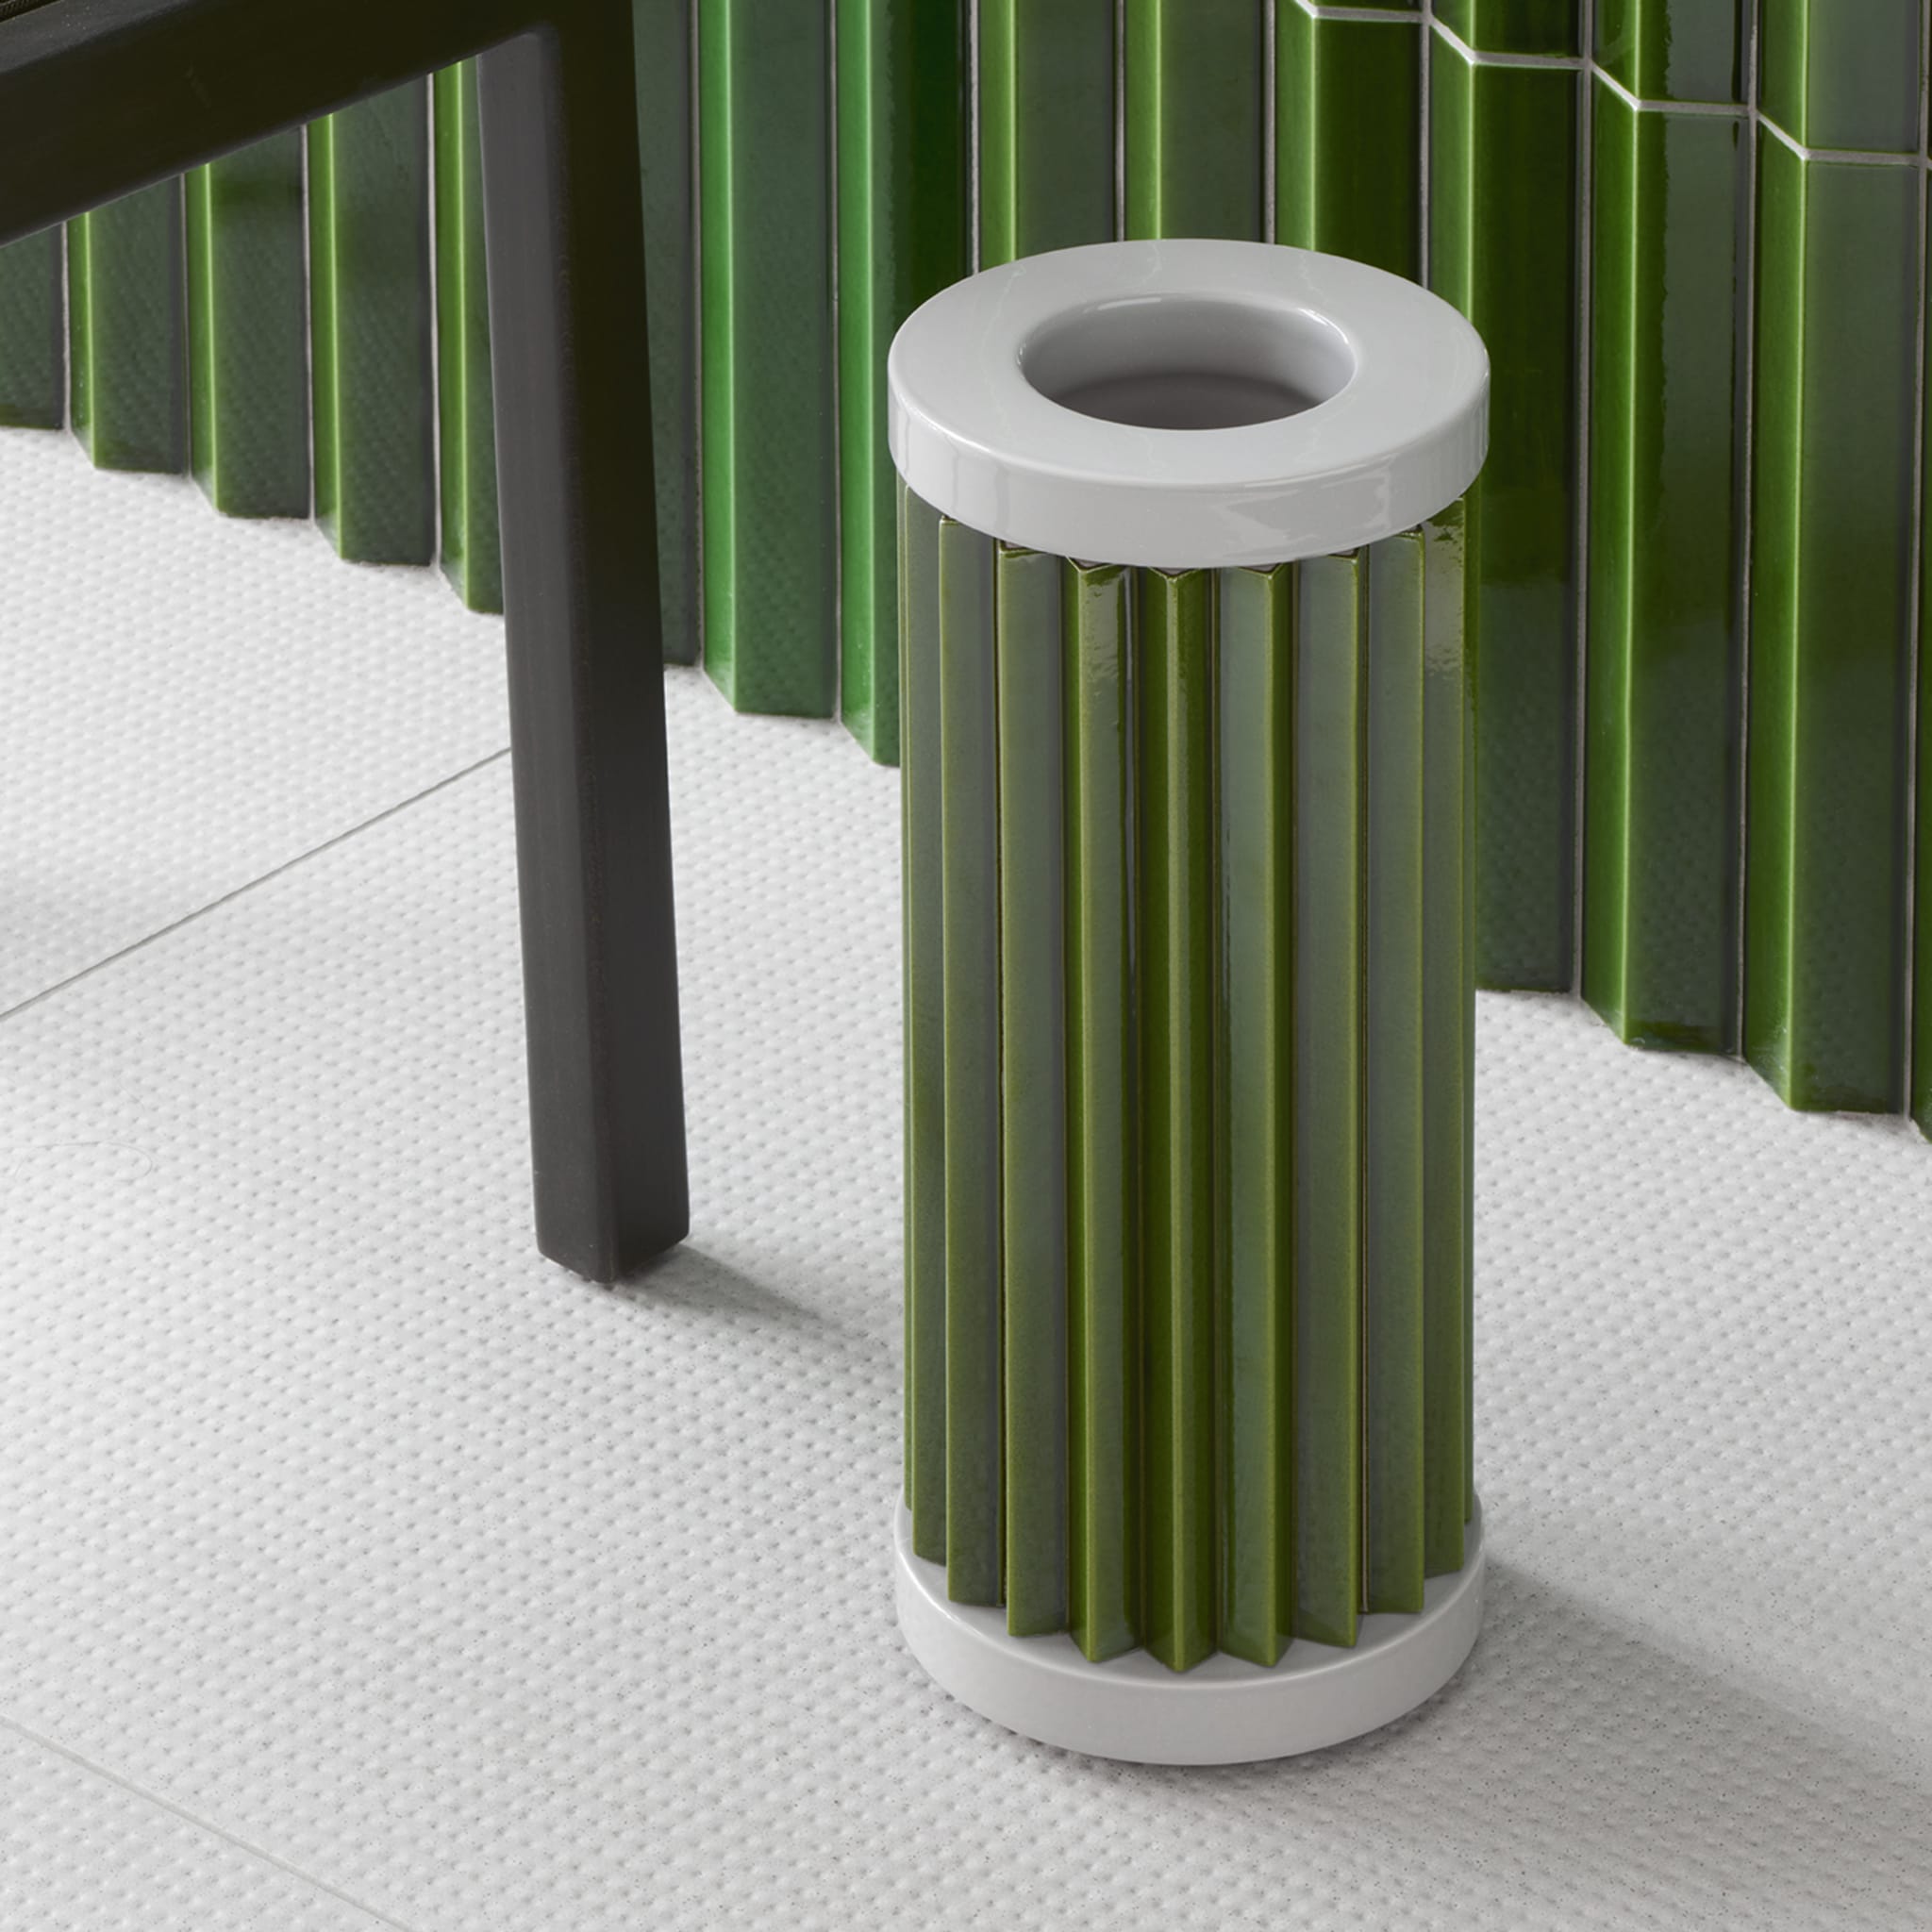 Rombini A Green and Gray Vase by Ronan & Erwan Bouroullec - Alternative view 2